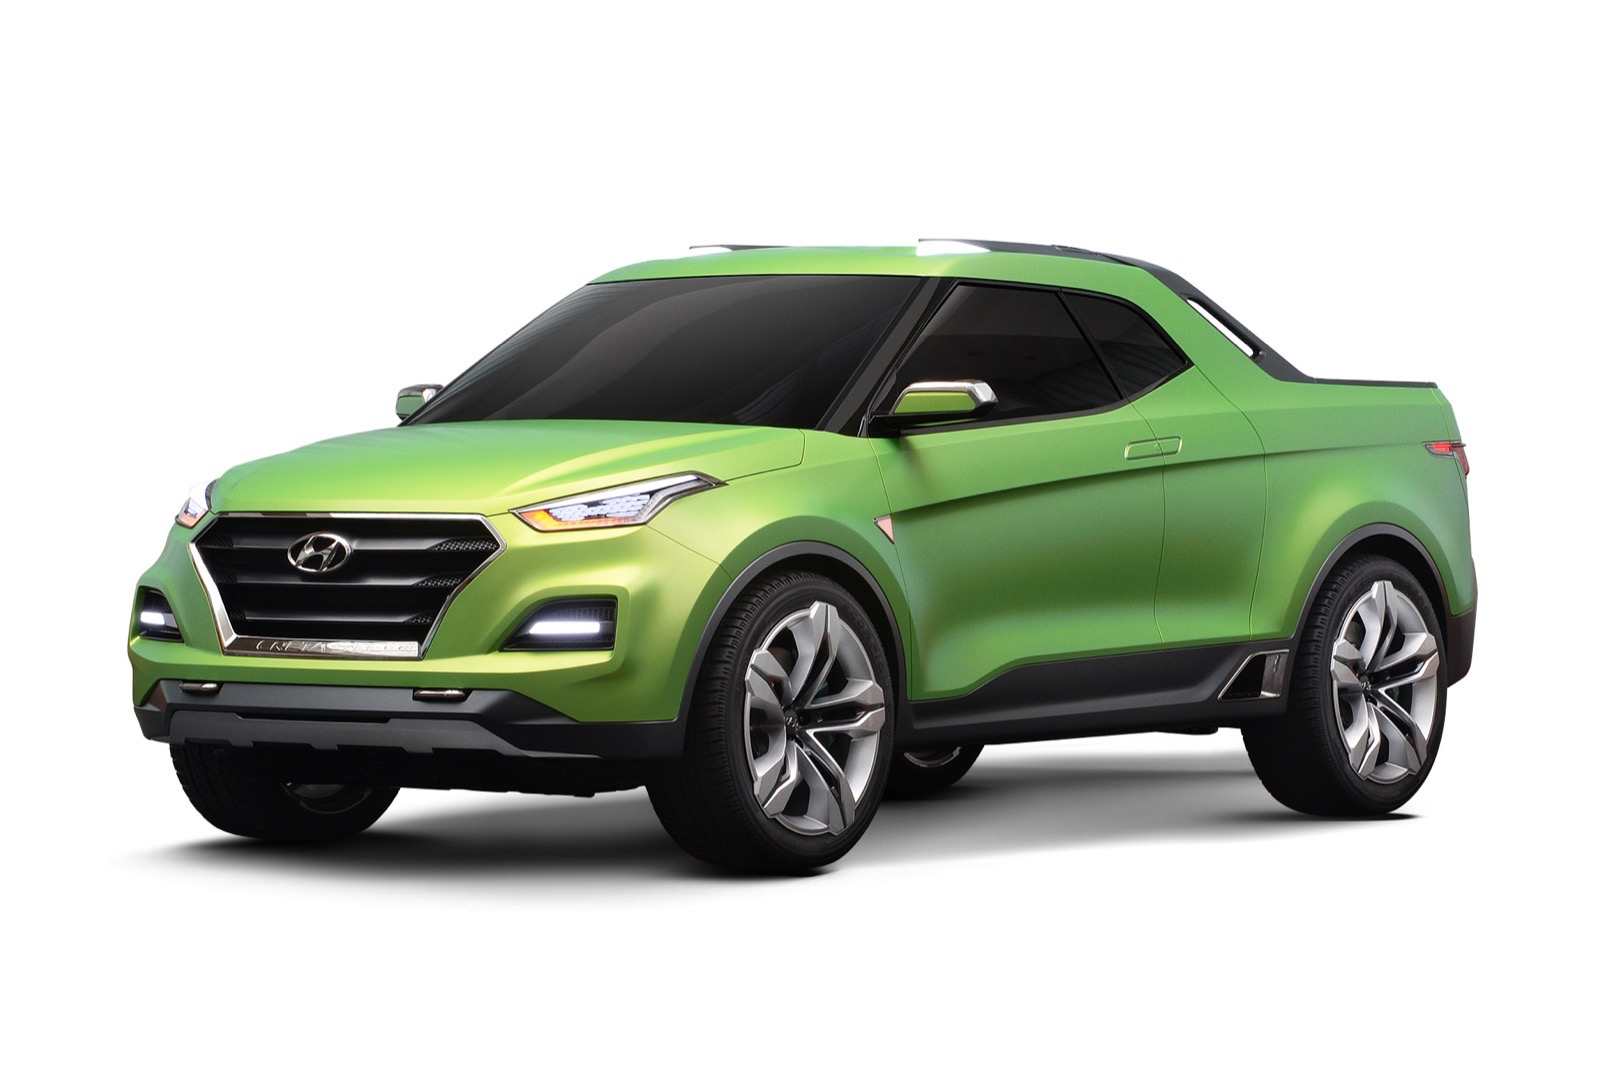 Hyundai to debut new car at Chicago show – report